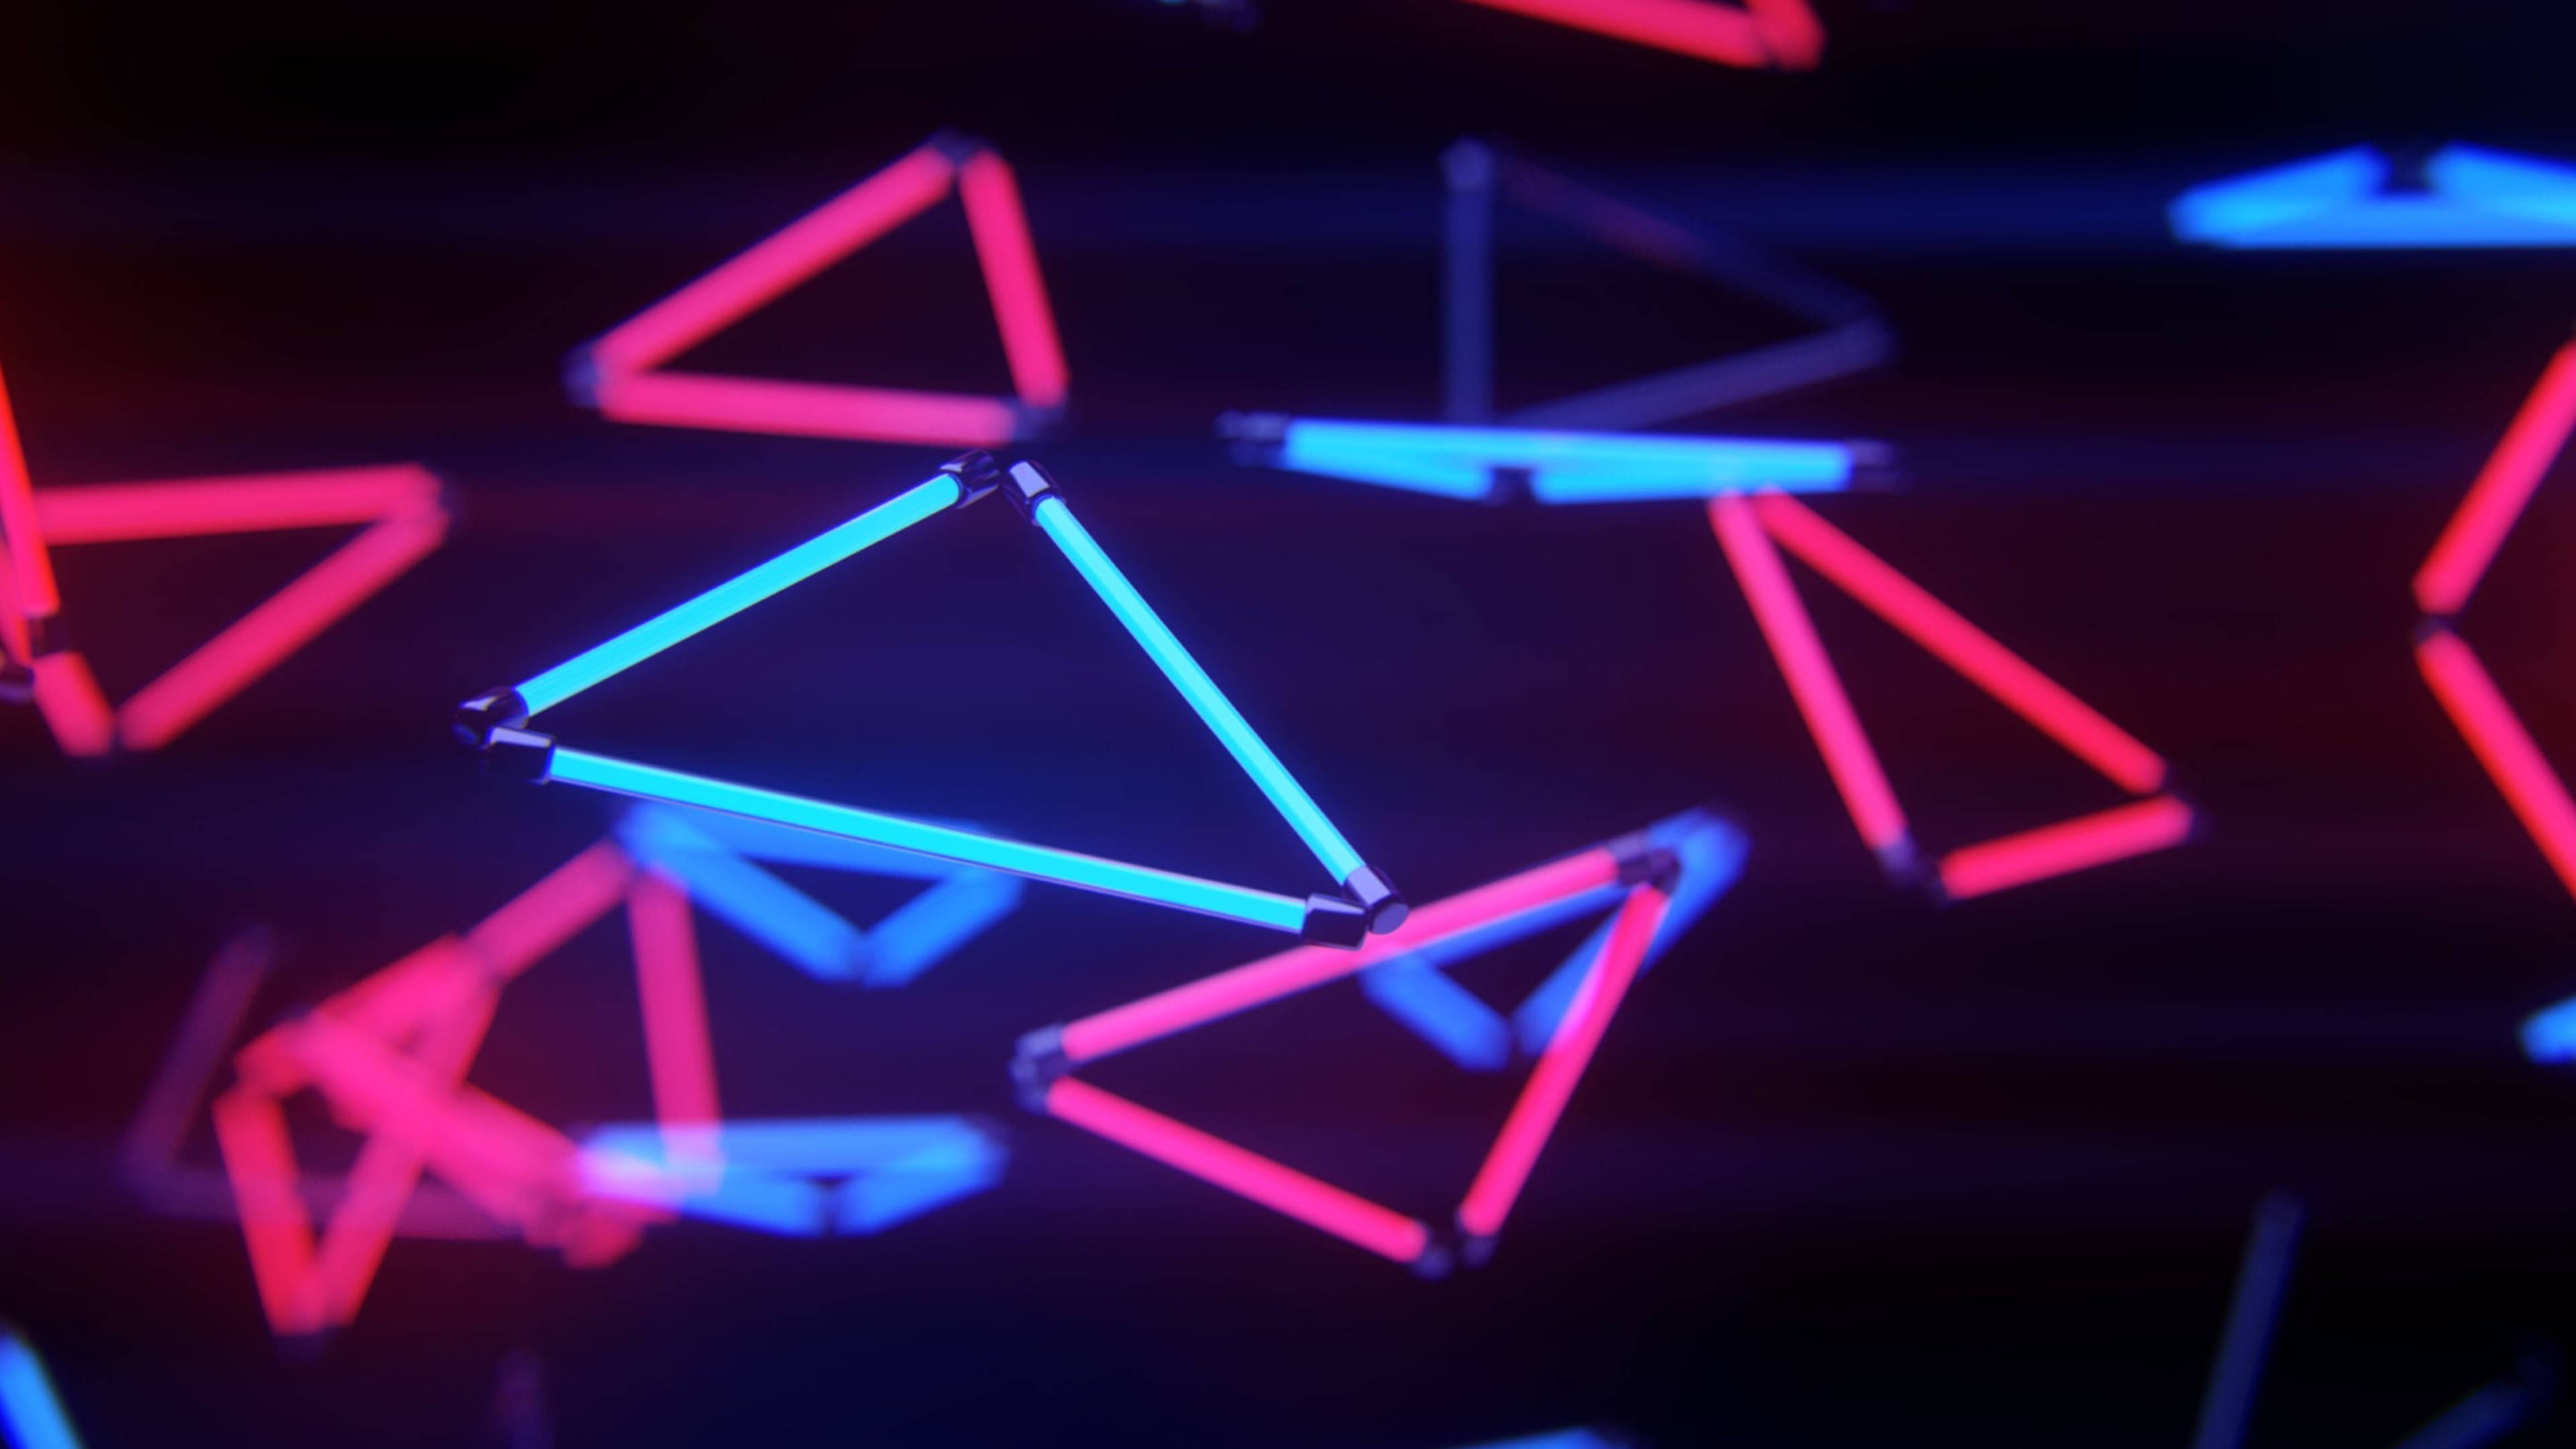 Blue And Red Triangle LED 4K Wallpaper